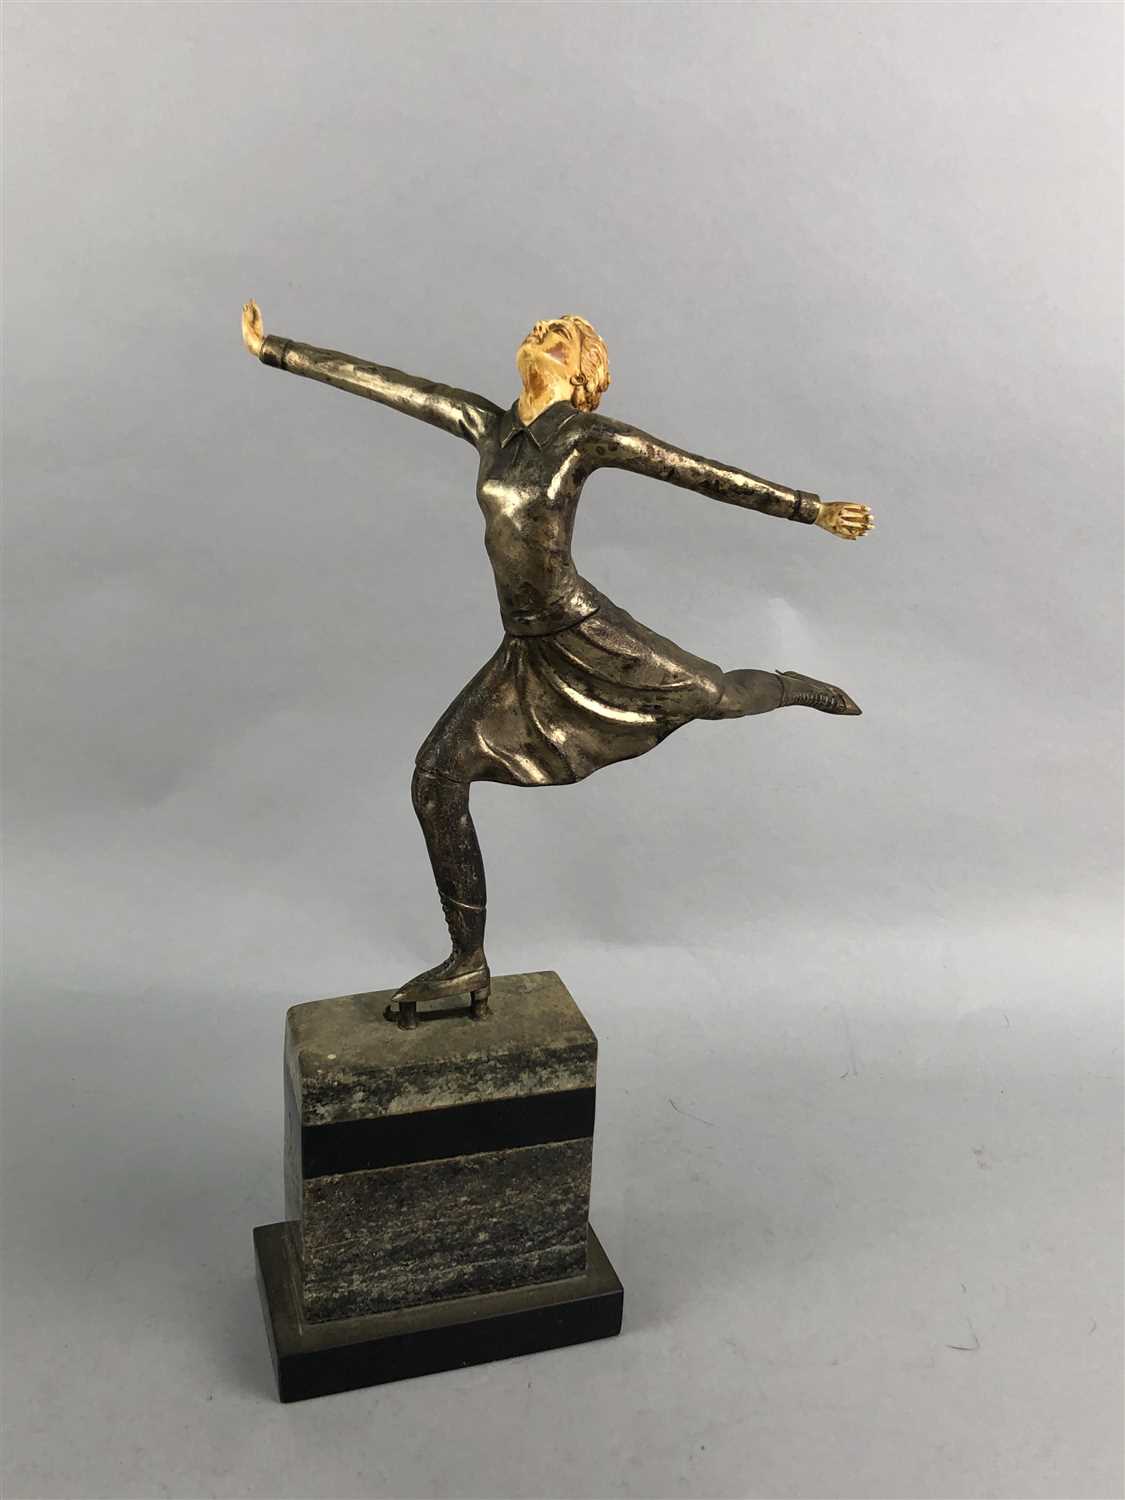 Lot 365 - A LOT OF TWO ART DECO STYLE FIGURES